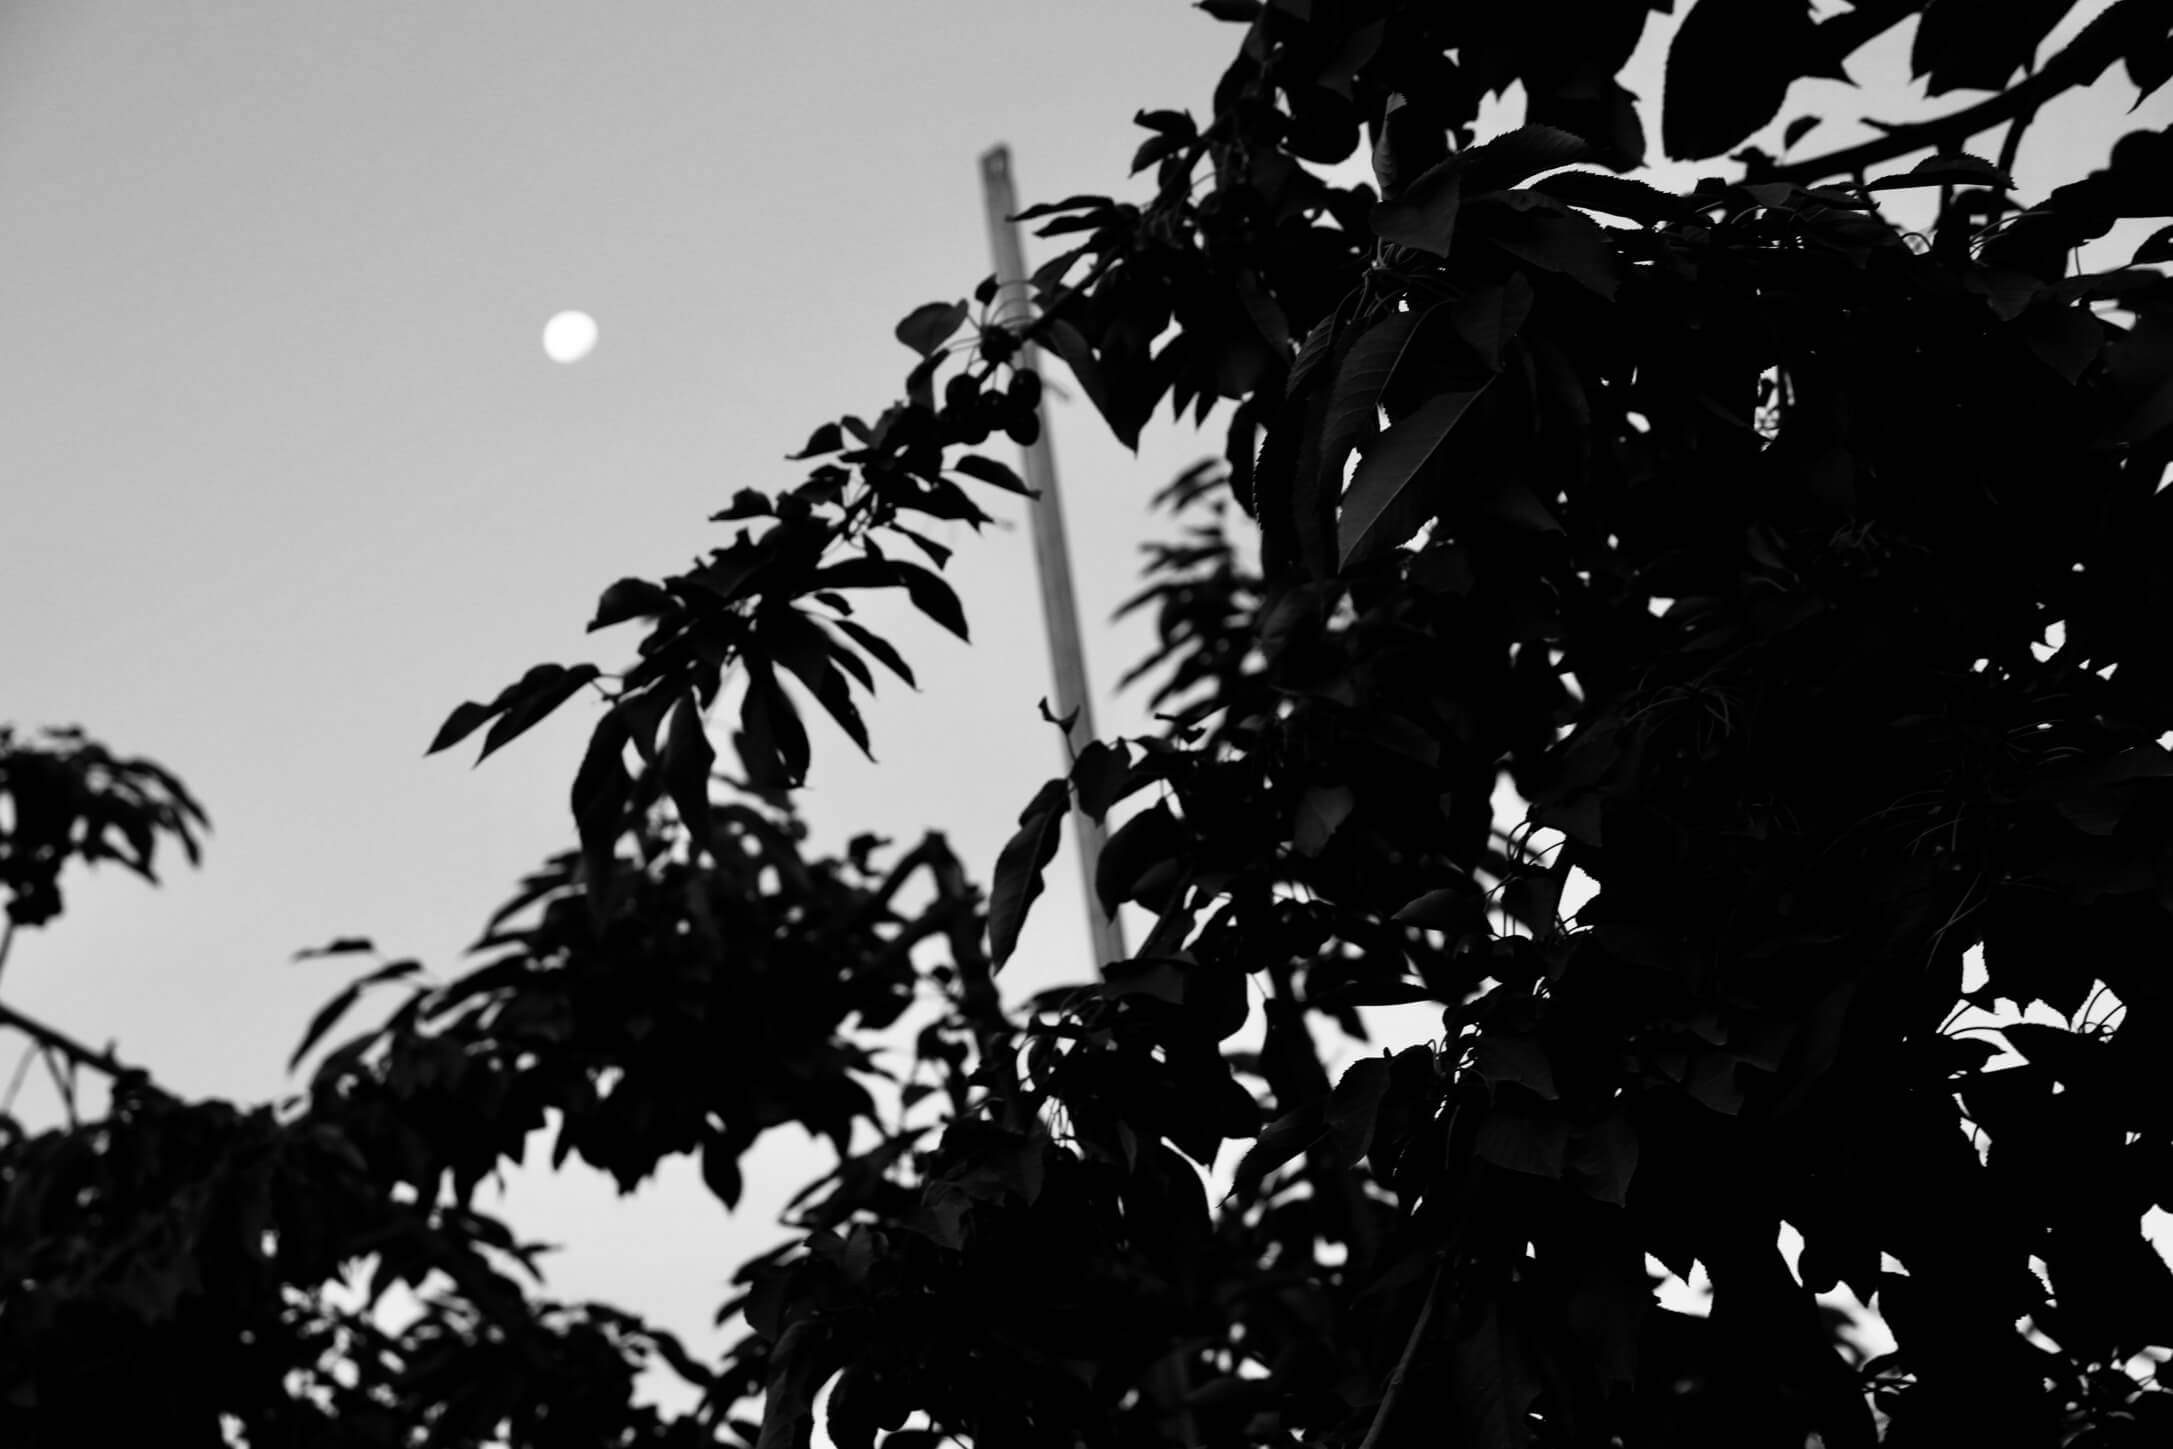 An early morning image of a cherry tree with the moon in the sky.